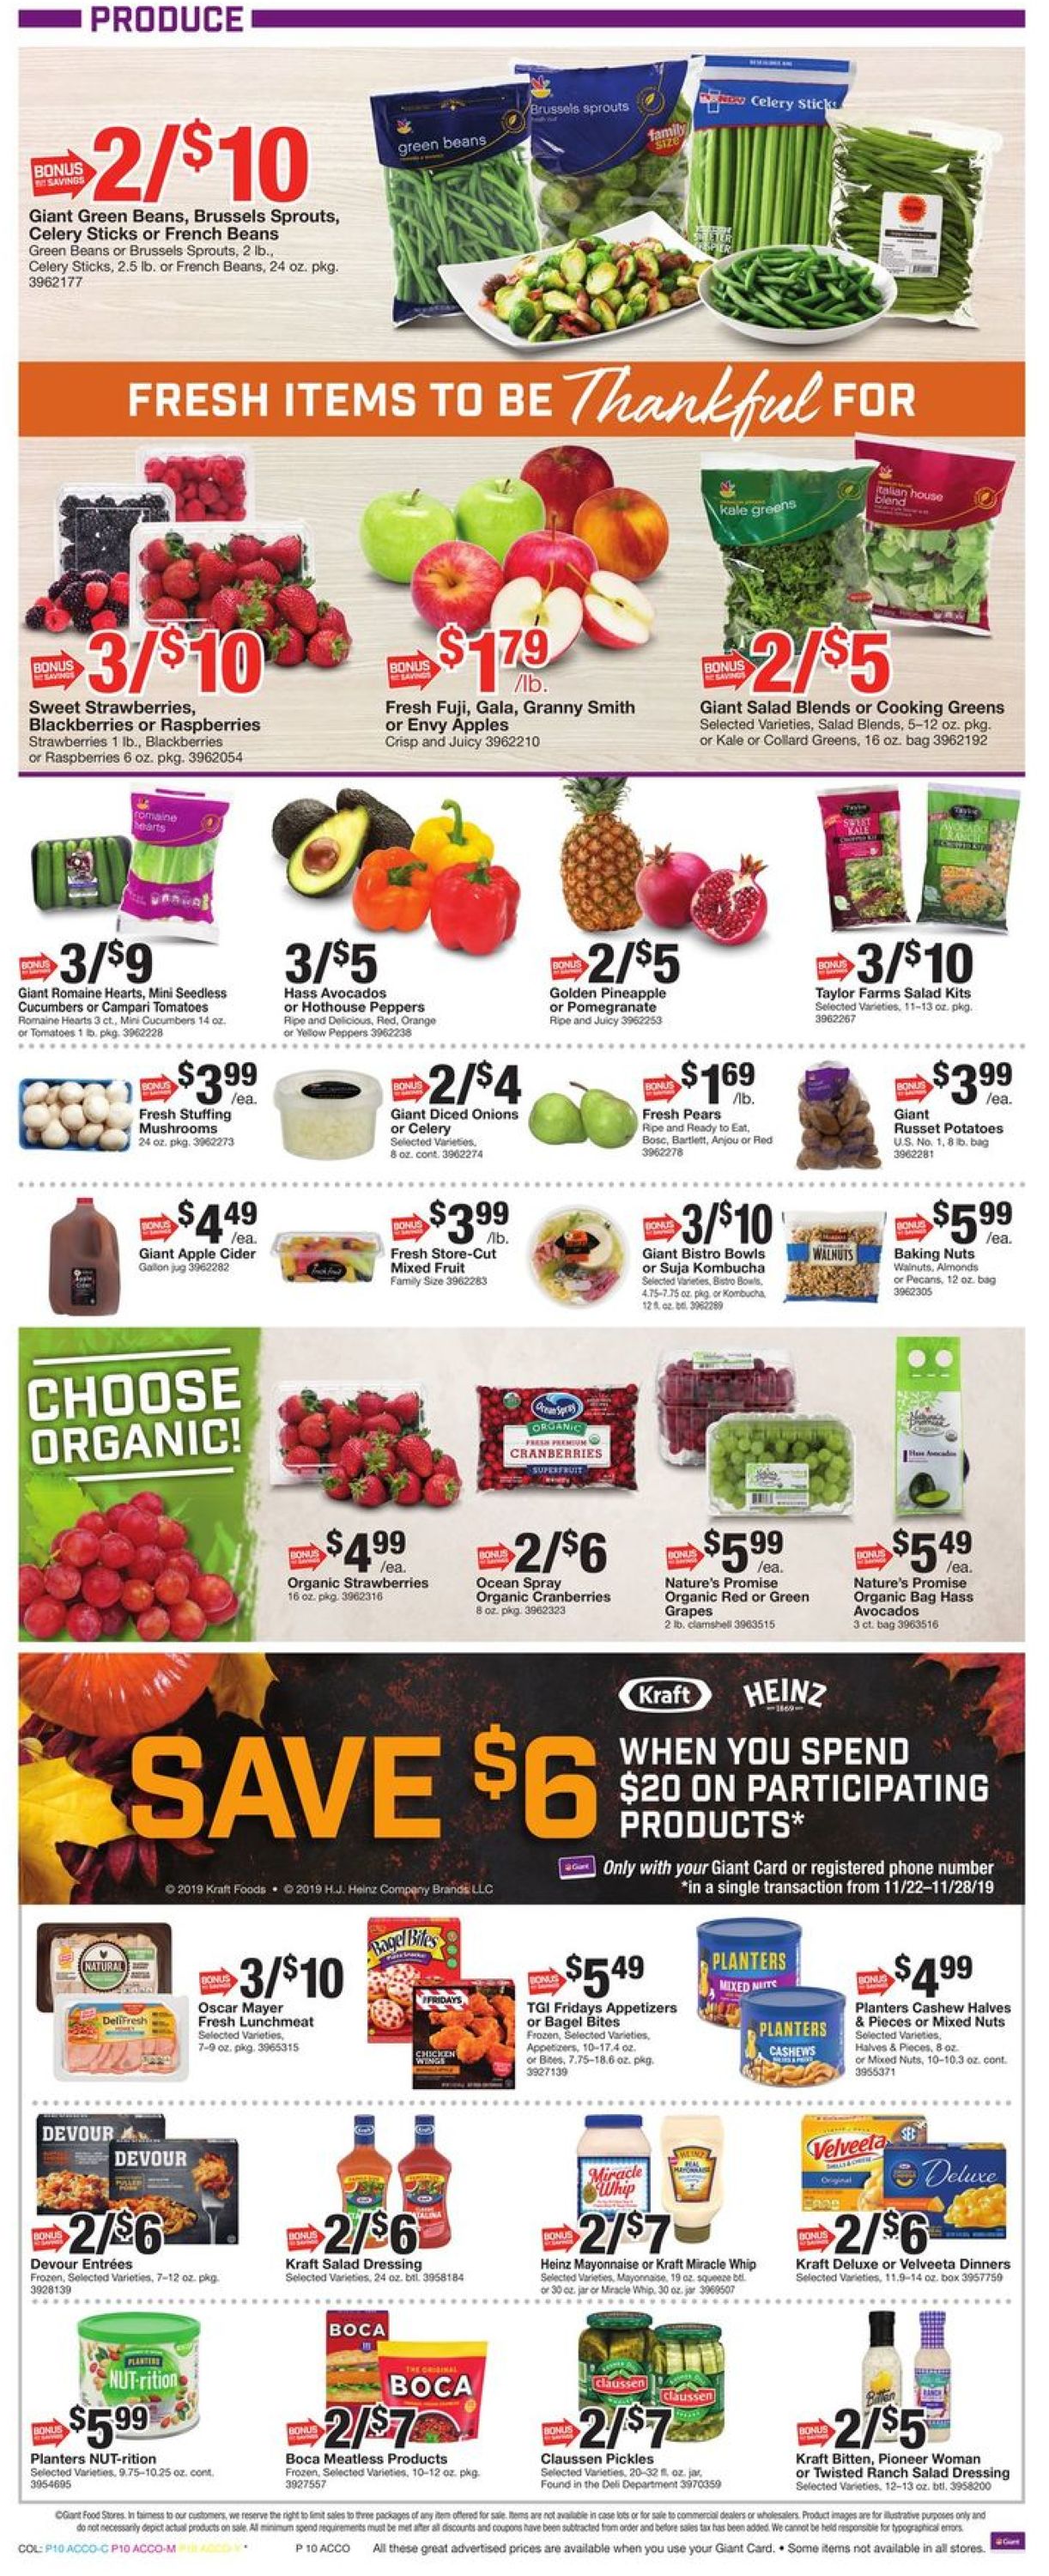 Giant Food - Thanksgiving Ad 2019 Weekly Ad Circular - valid 11/22-11/28/2019 (Page 15)